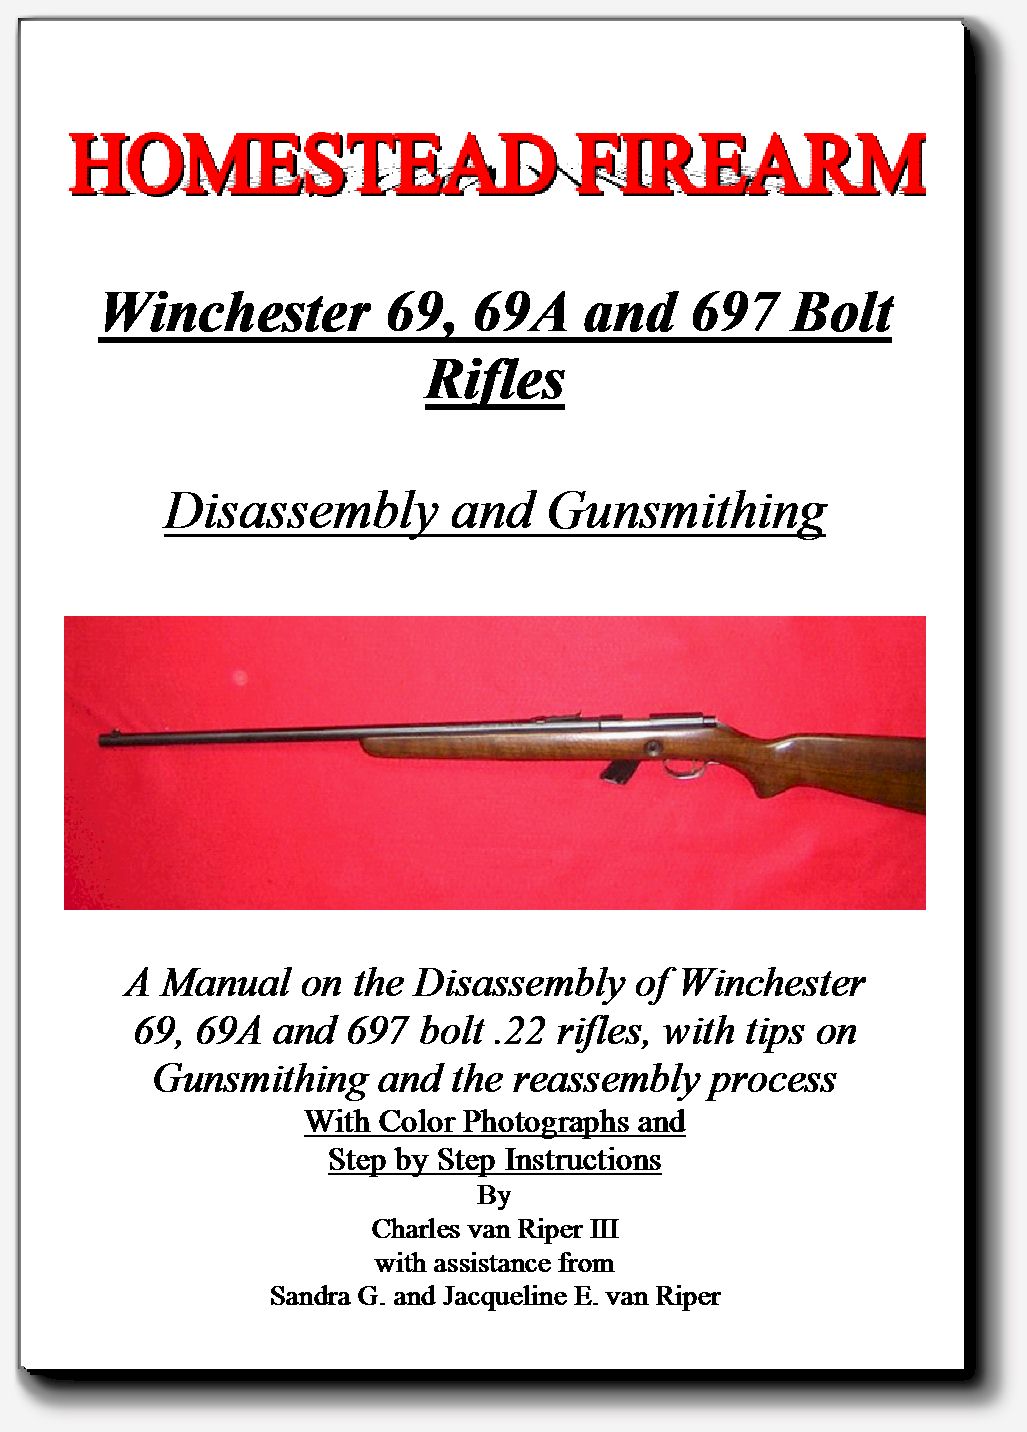 A Disassembly Manual for Winchester Model 69, 69A and 697